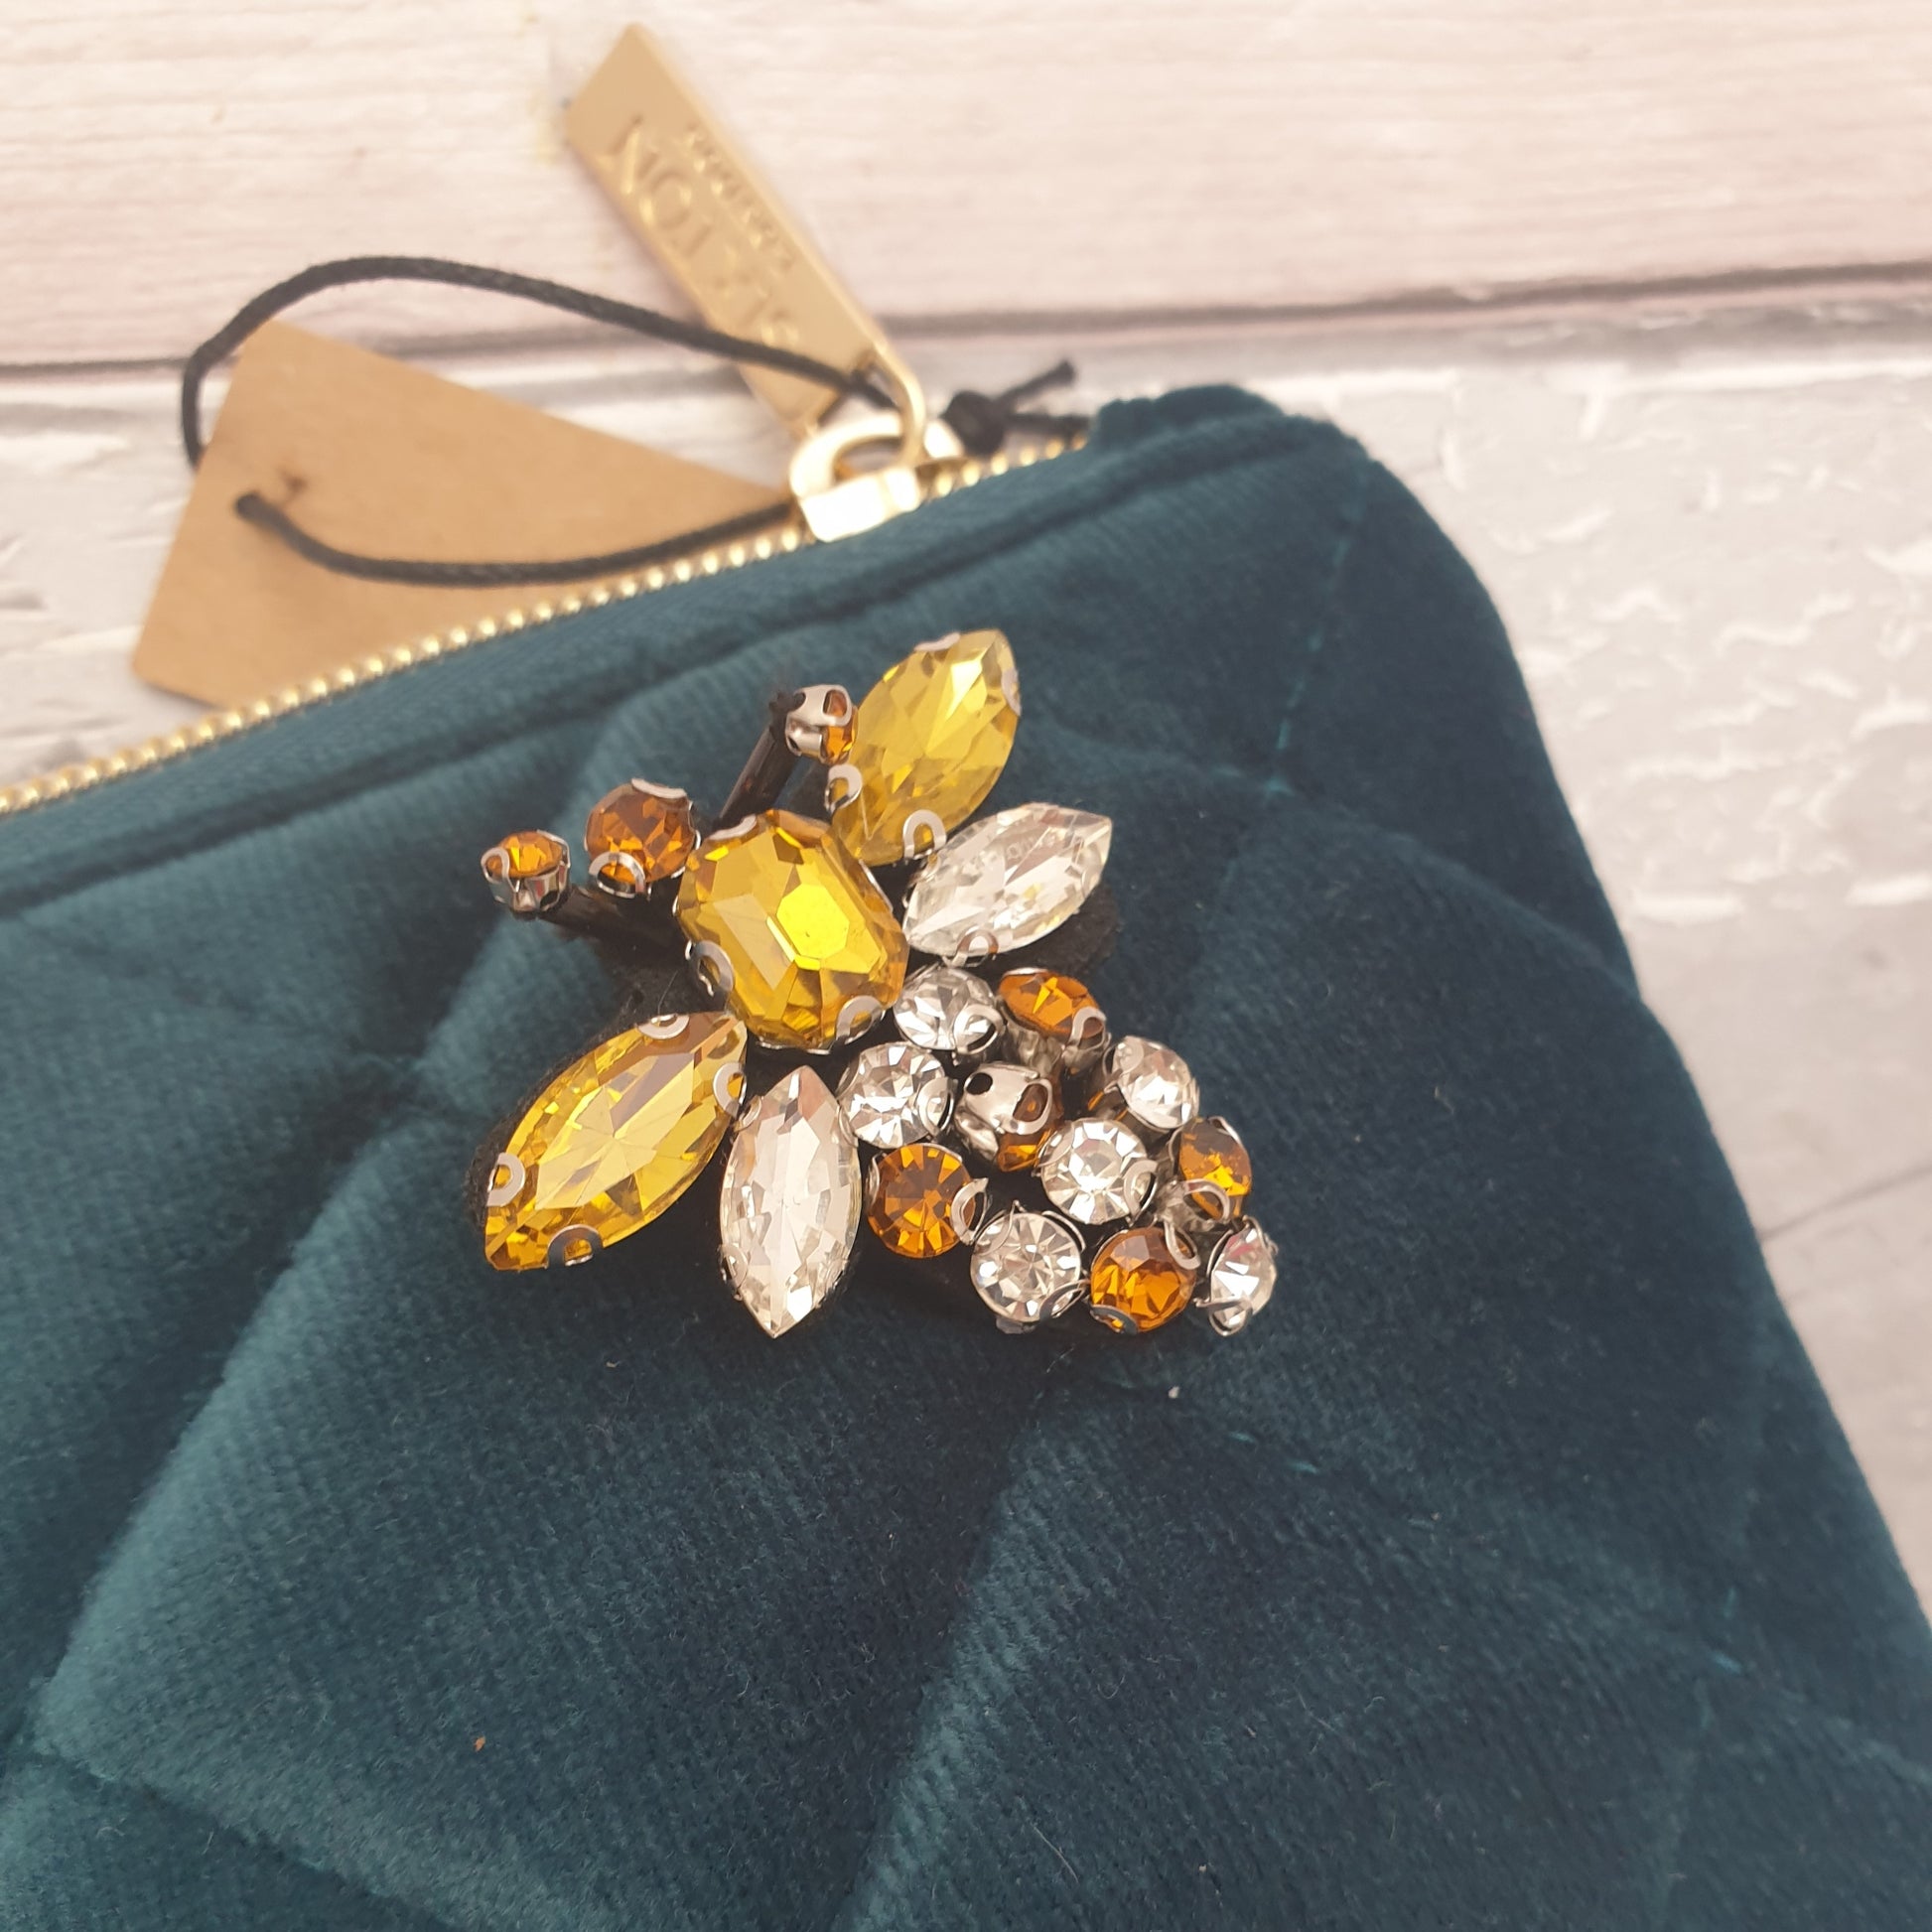 Teal Blue Make Up Bag made from quilted velvet with a Glass Bee Brooch in Gold.